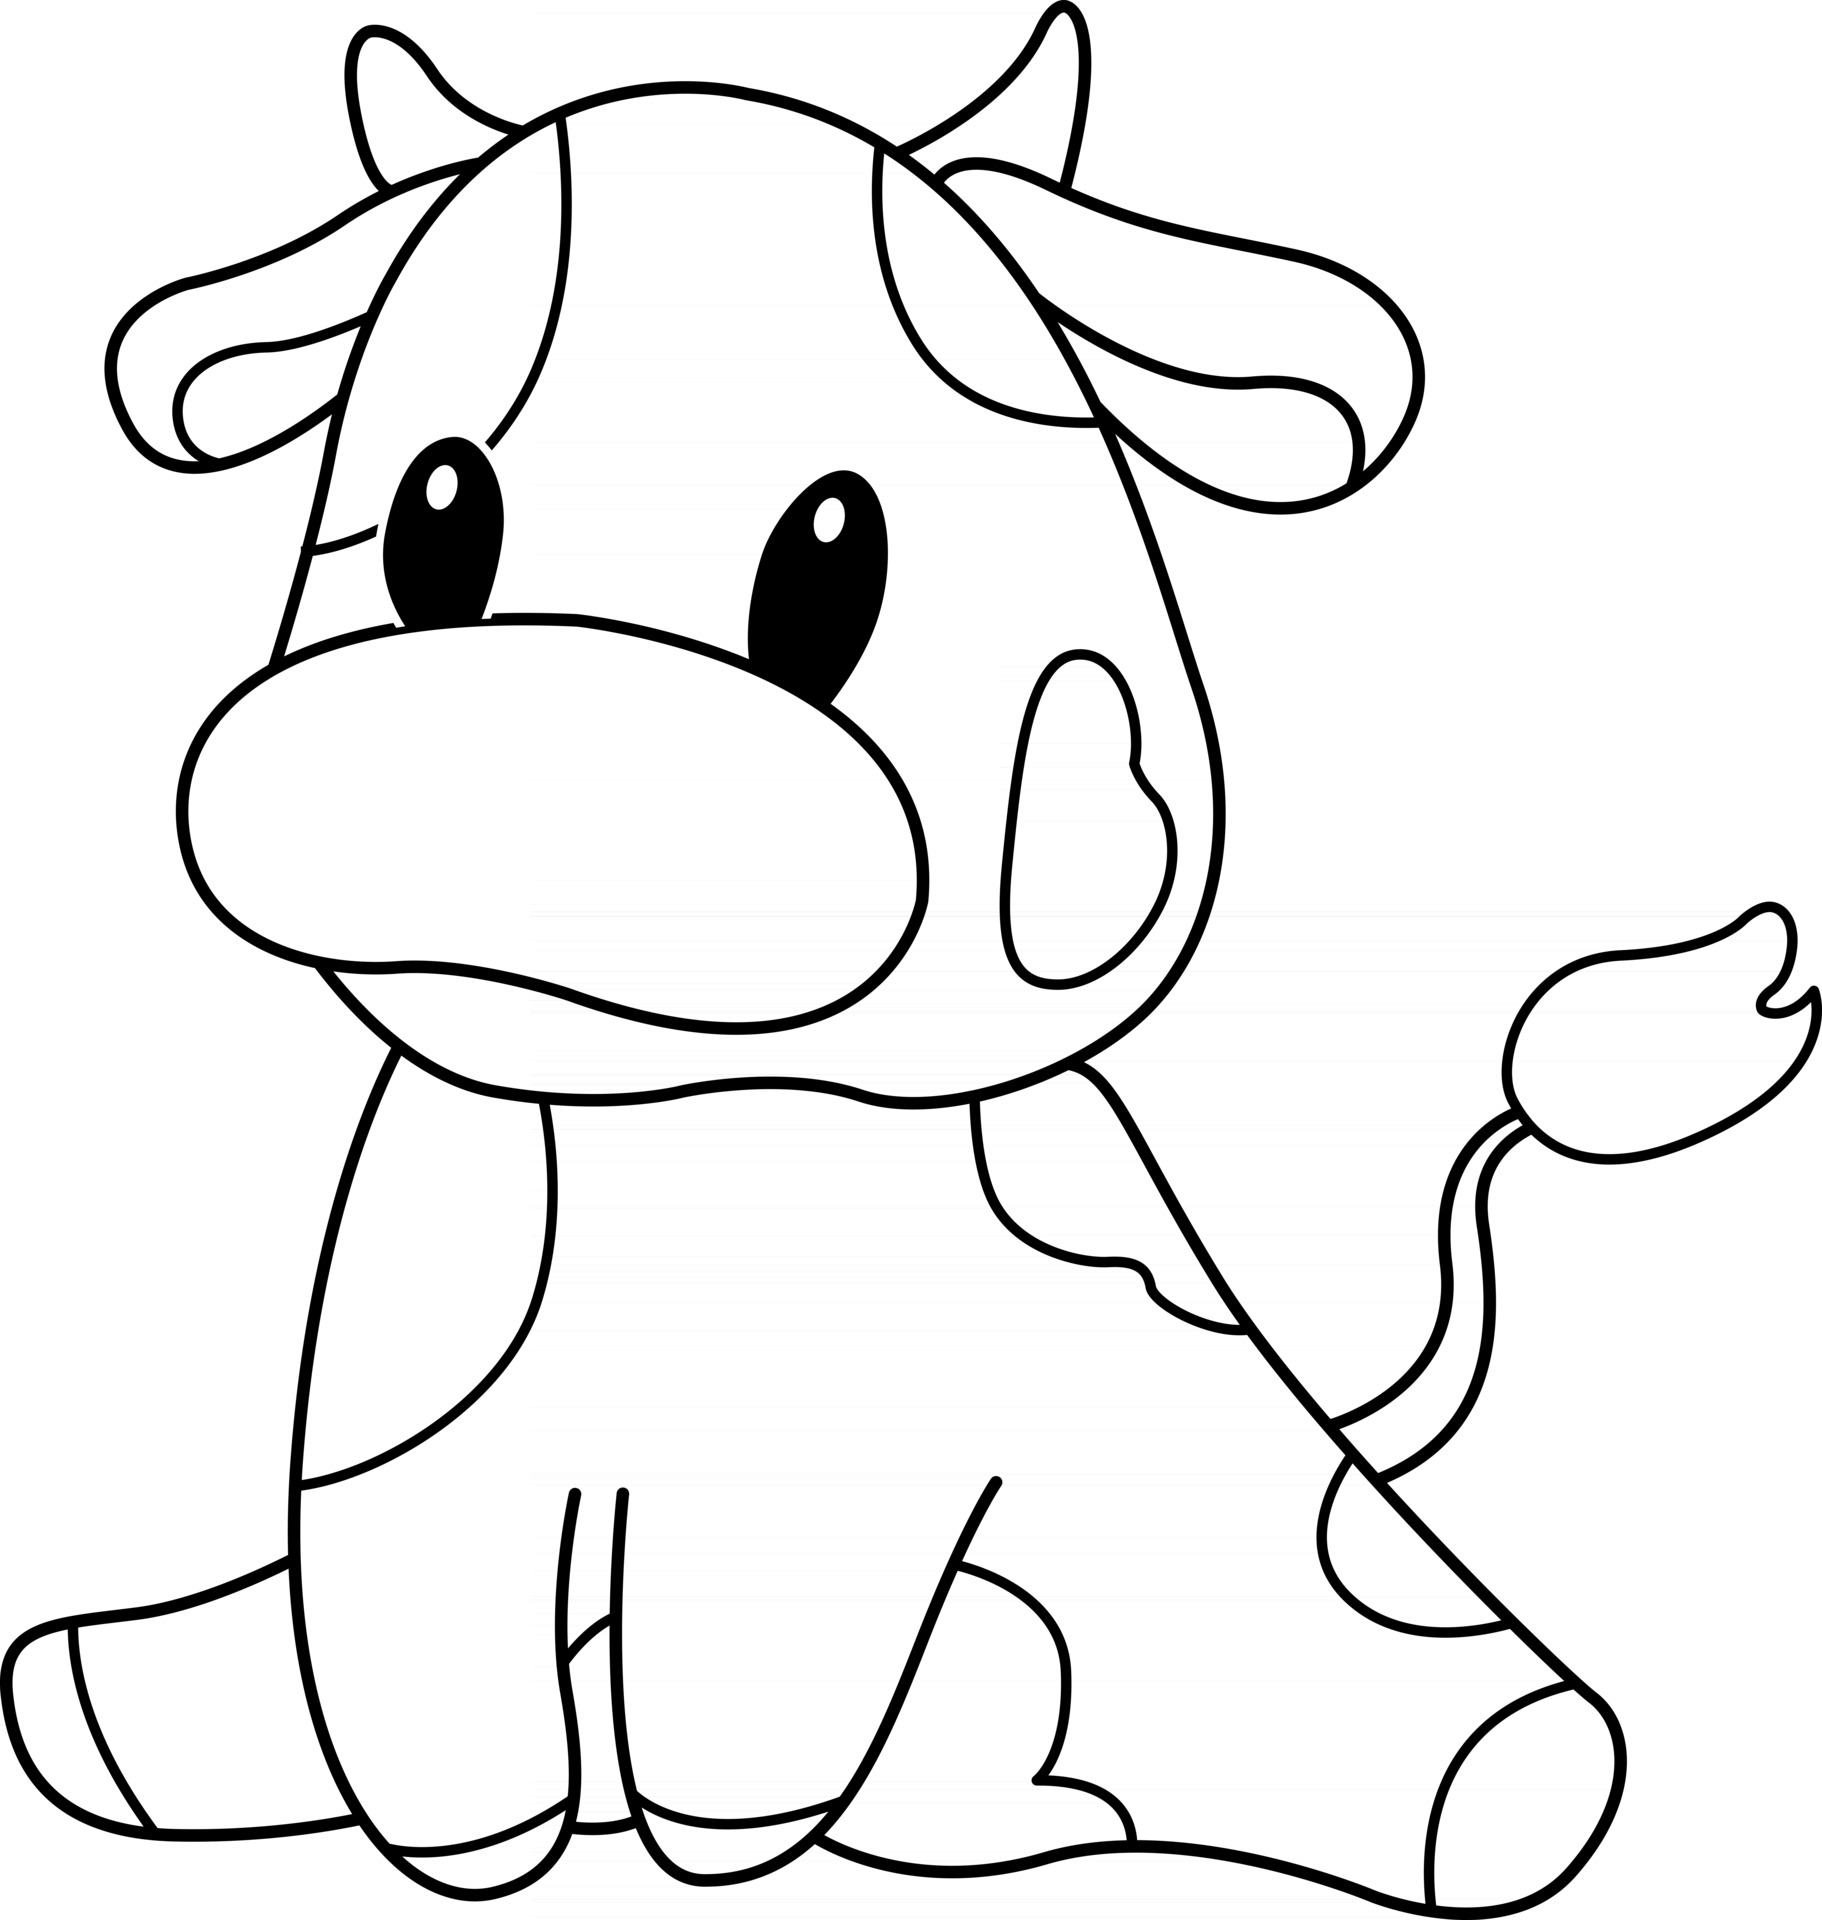 cow-kids-coloring-page-great-for-beginner-coloring-book-2485696-vector